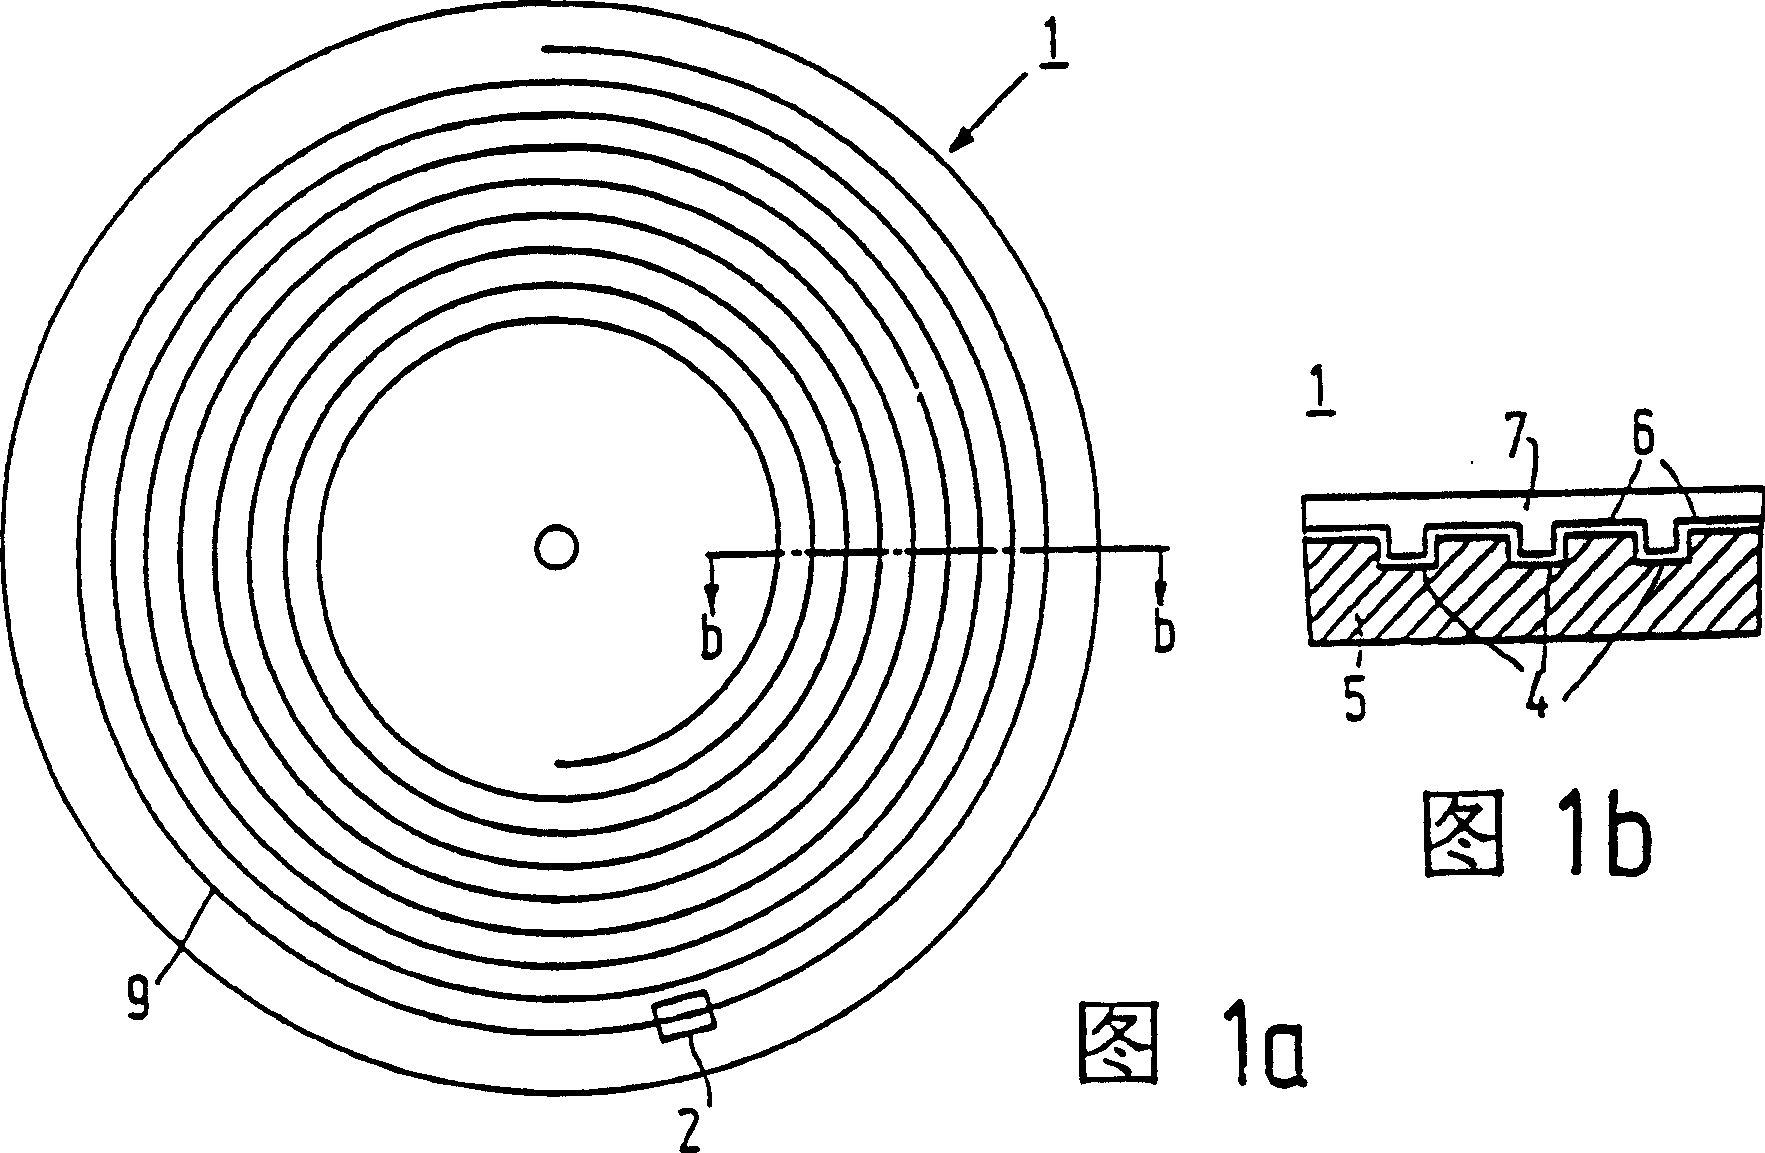 Information carrier and recording equipment used for recording information carrier